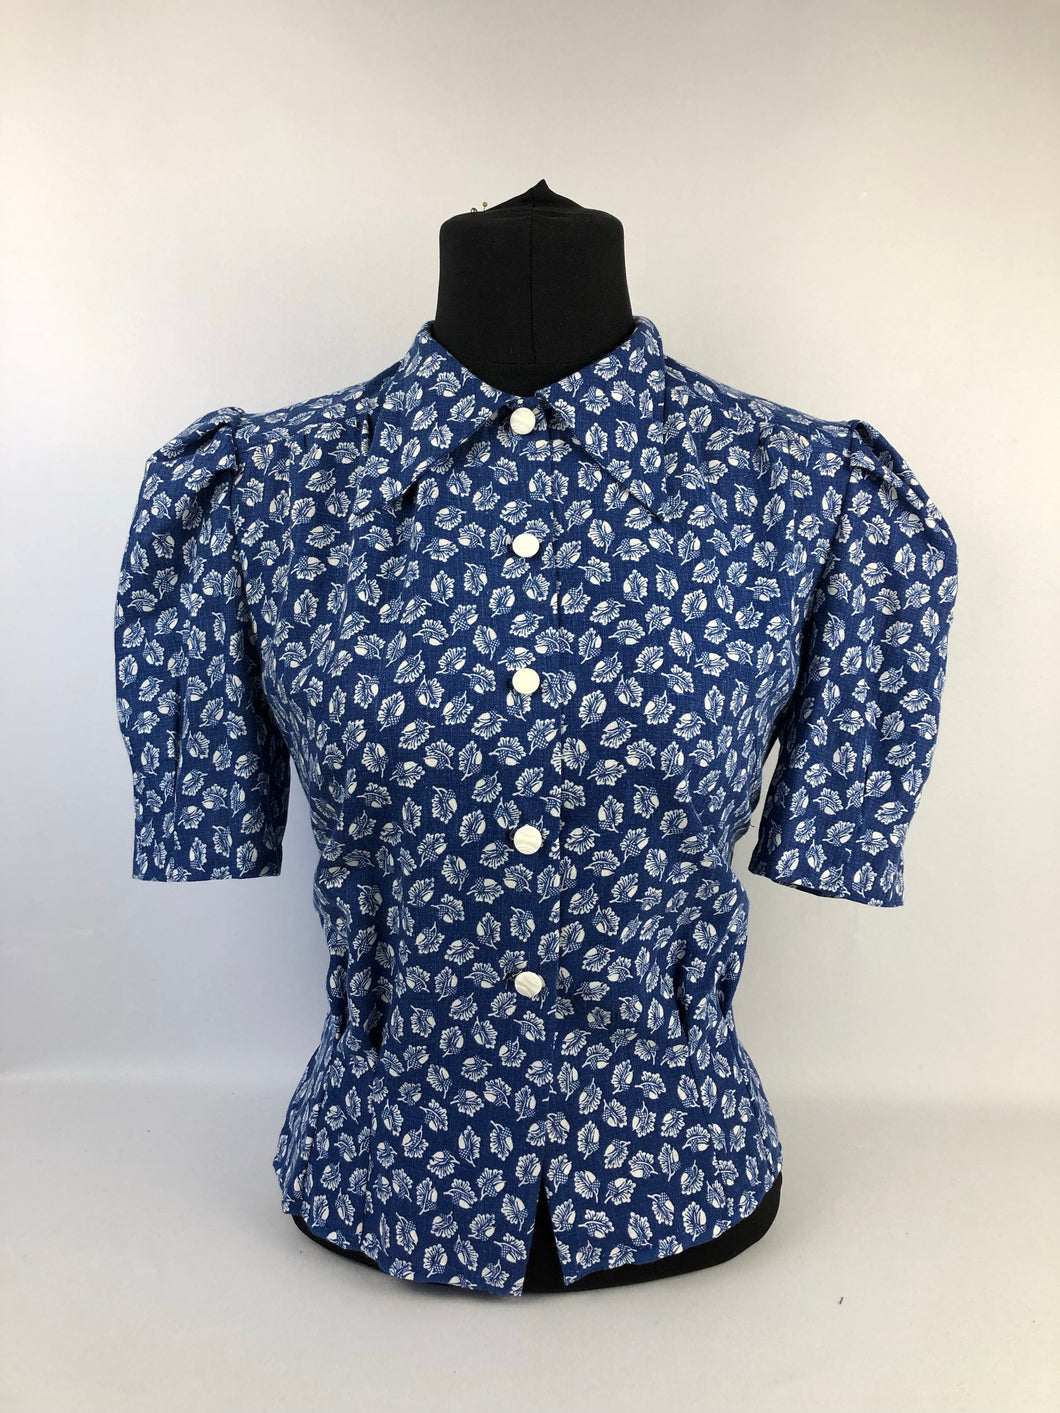 1940s Reproduction Feed Sack Blouse with Acorn Novelty Print - Bust 34 36